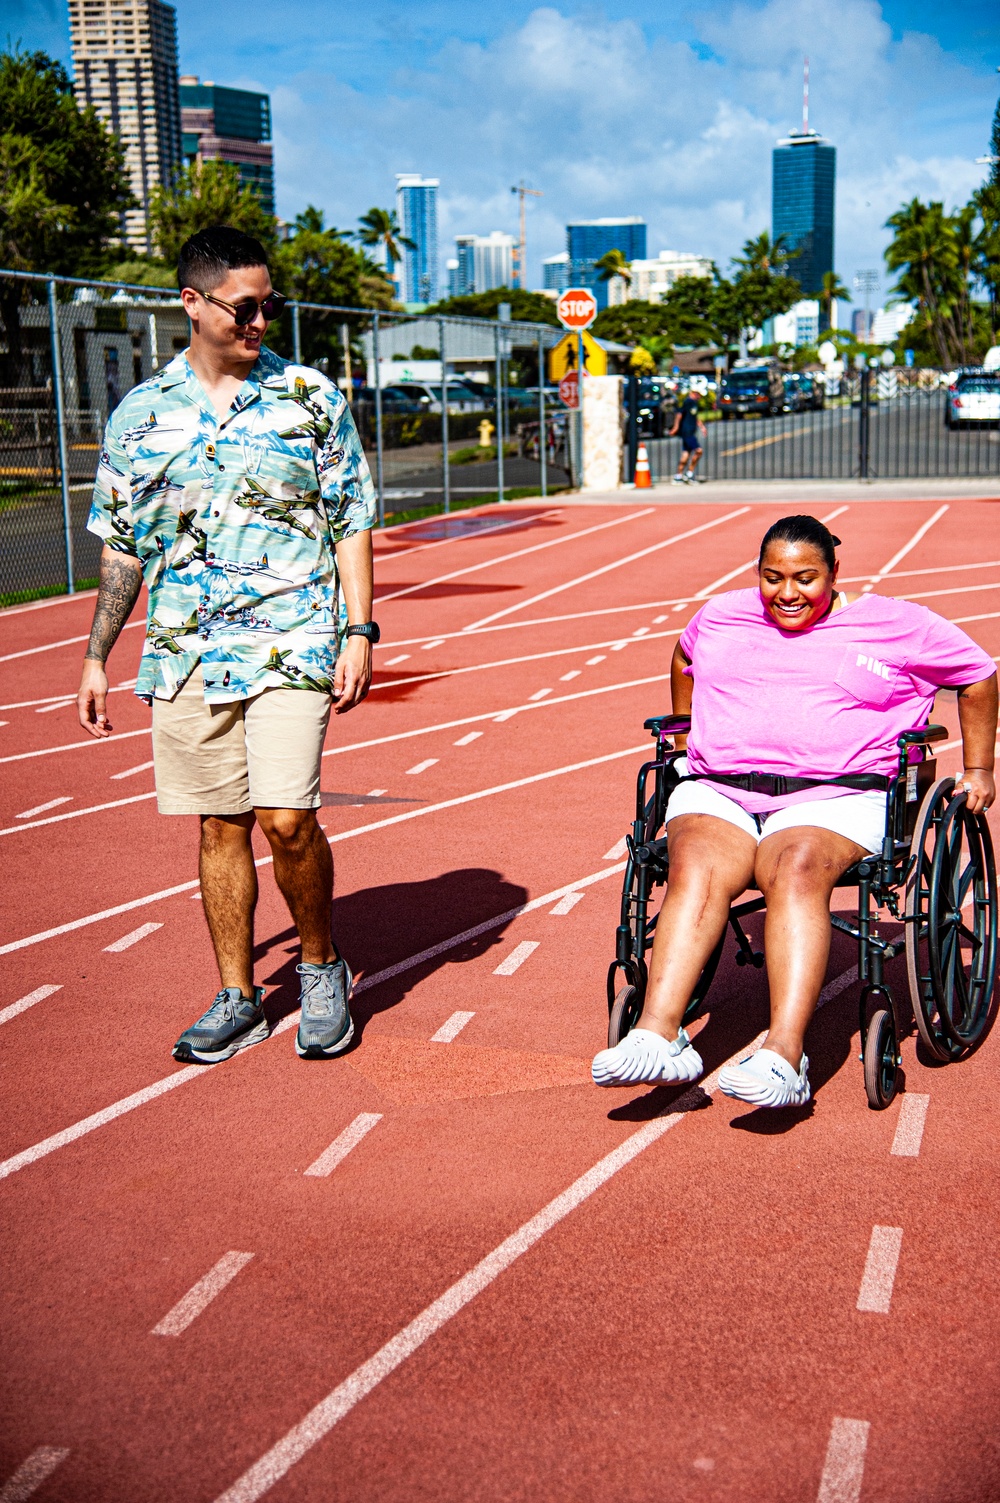 Navy Wounded Warrior athletes participate in adaptive sports in Hawaii